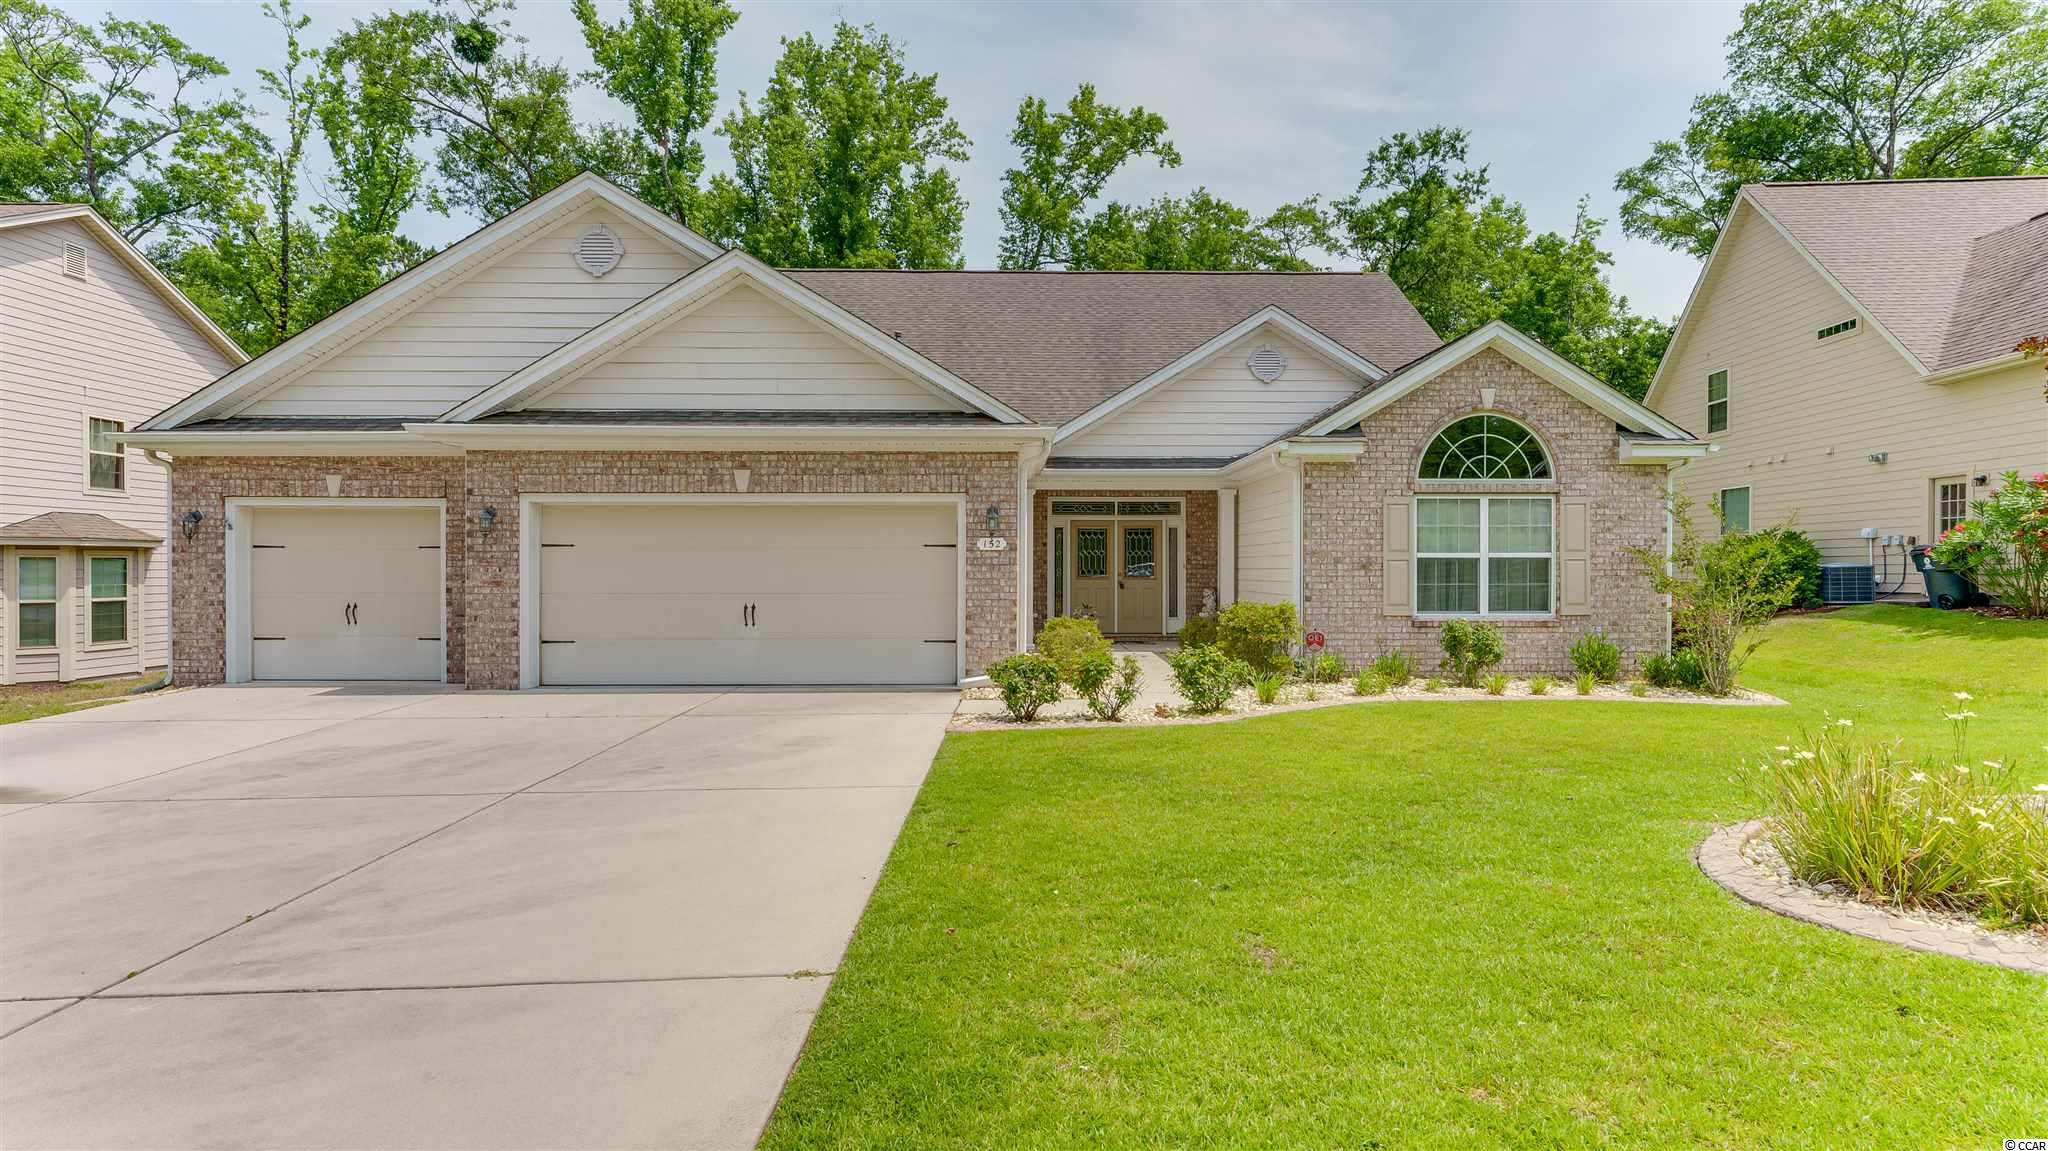 152 Rivers Edge Dr. Conway, SC 29526